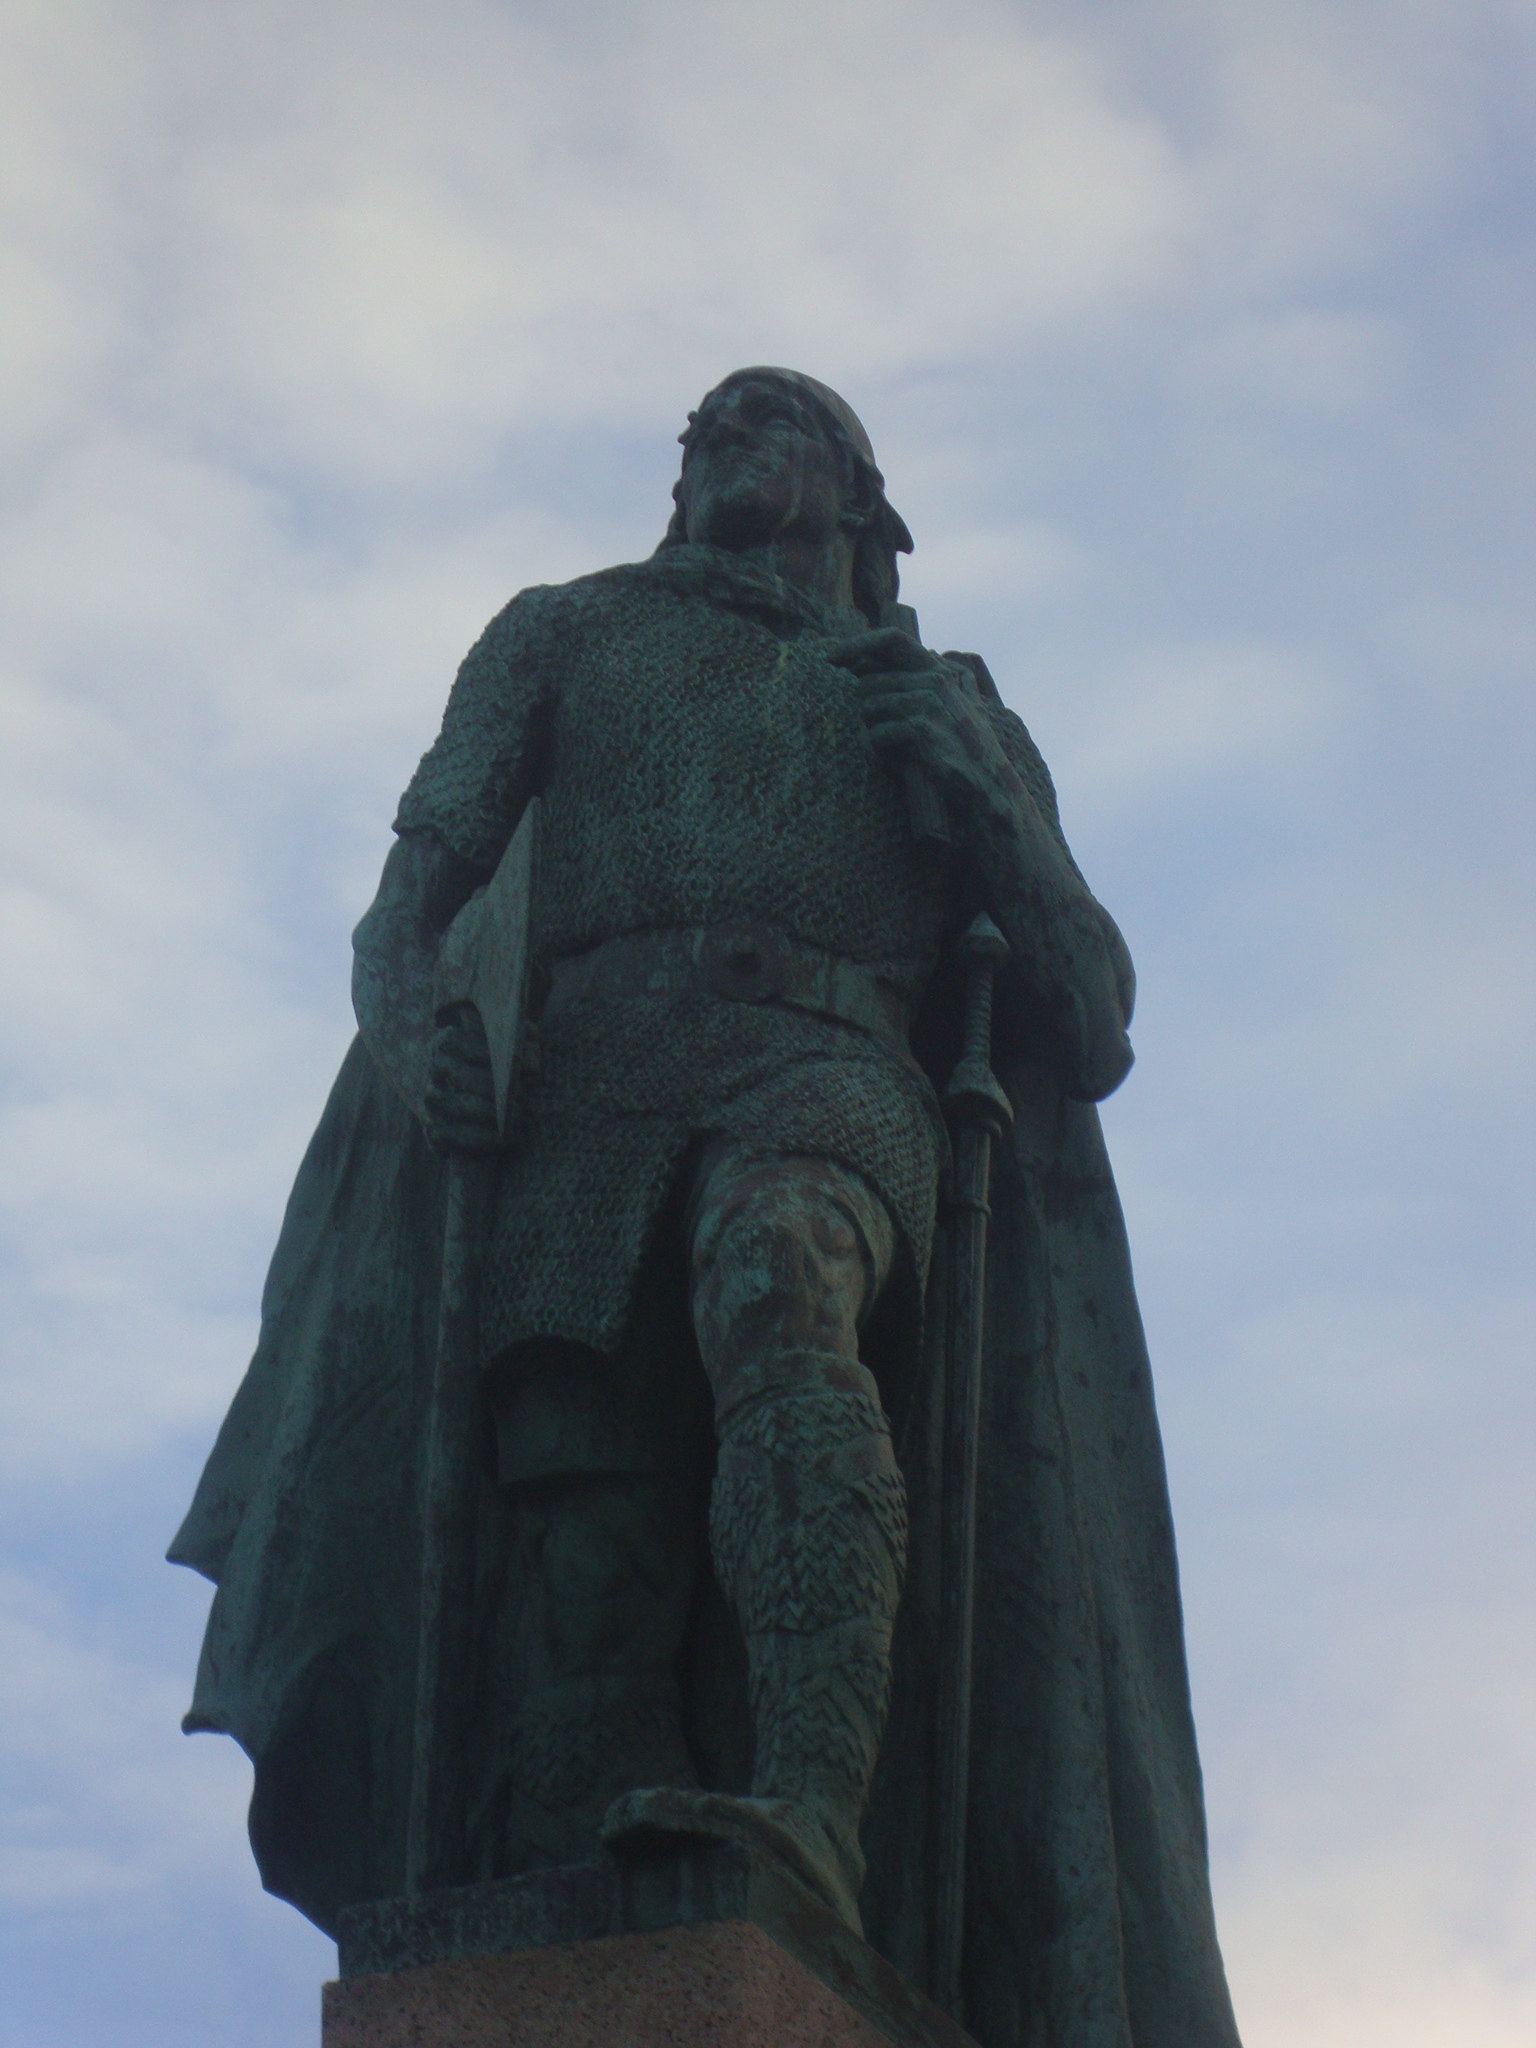 The statue in front of the Hallgrímskirkja